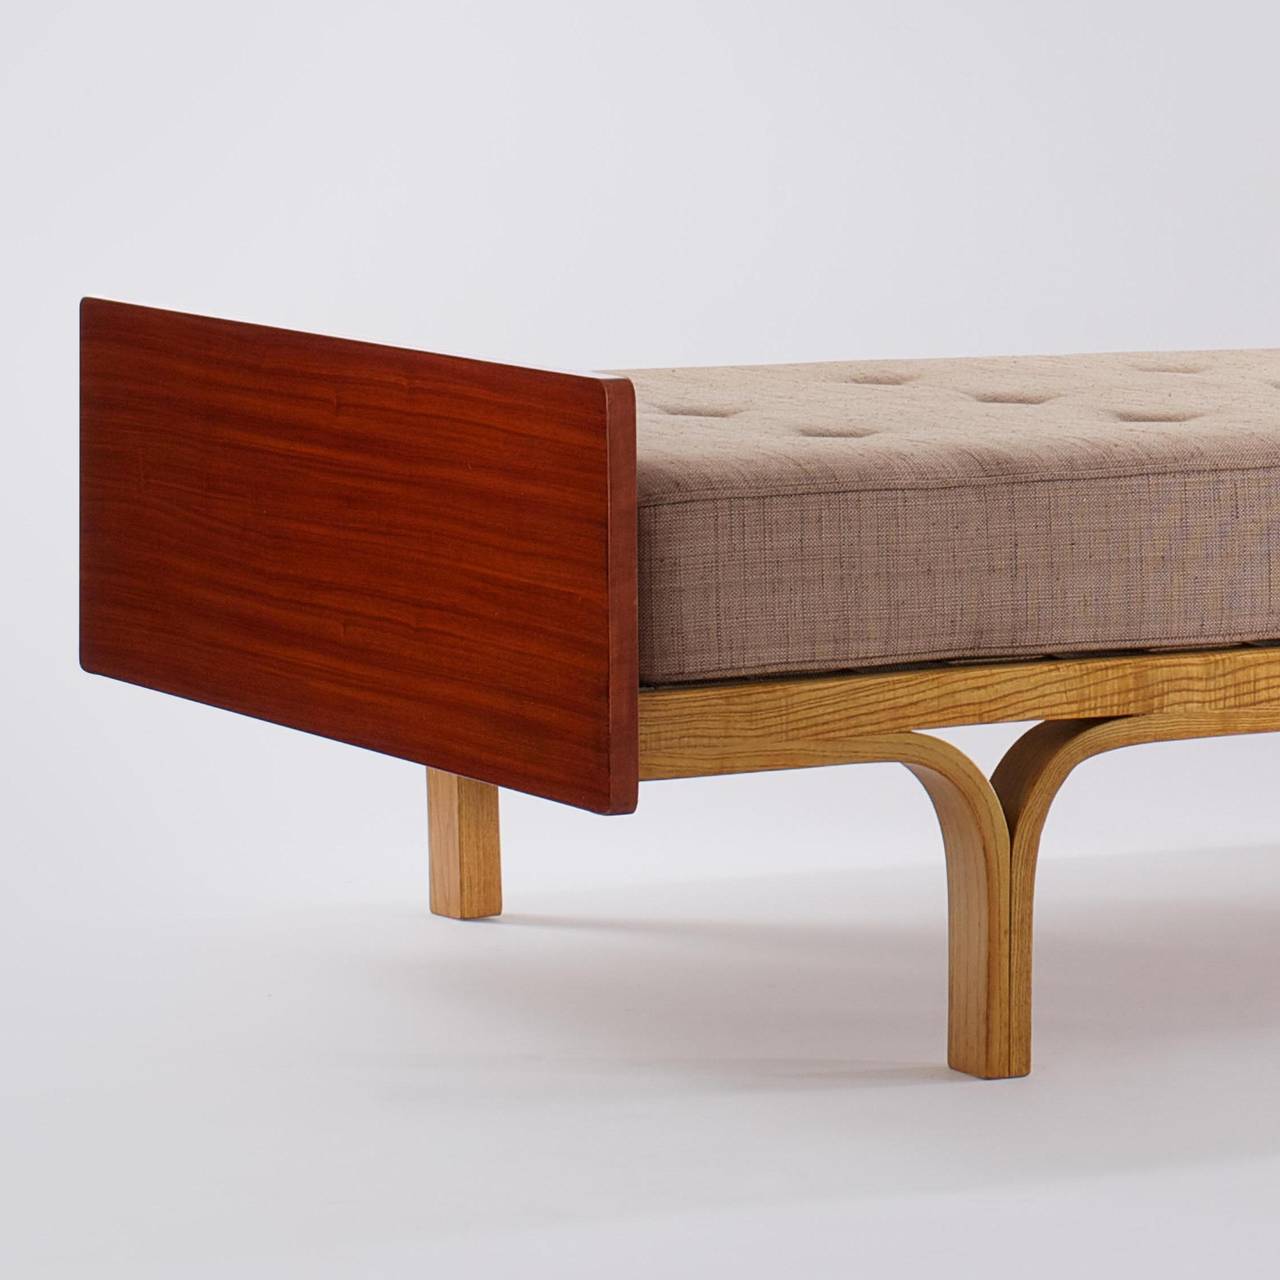 1950s daybed by Joseph Andre Motte.
Edition Charron.

About the designer: Joseph Andre´ Motte (1925-2013) was a member of the young generation of French designers that emerged immediately following World War II and included Pierre Guariche,